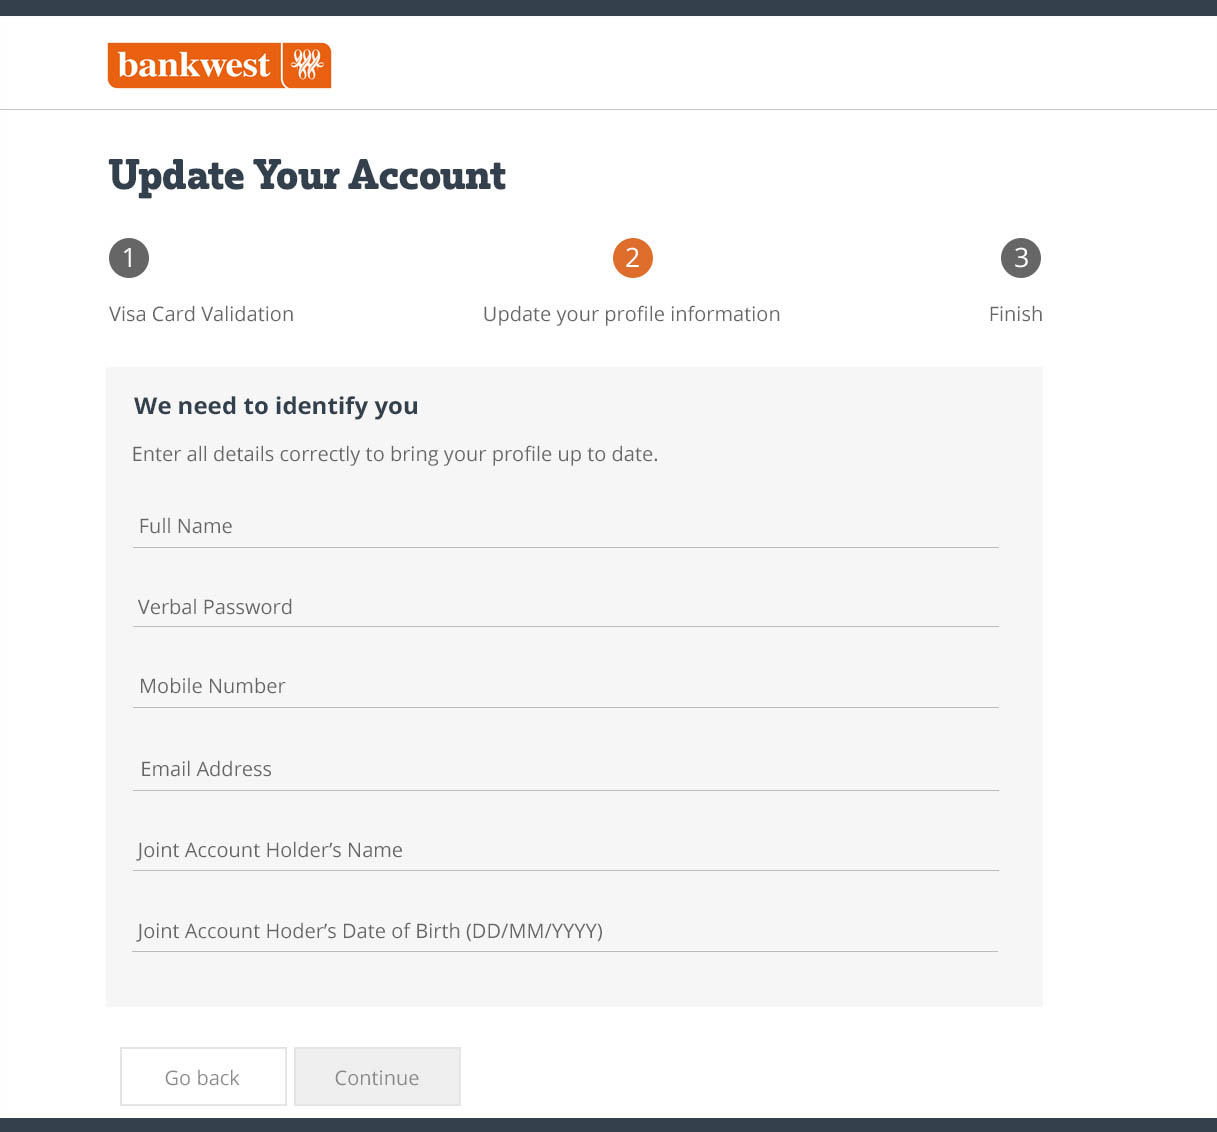 Image example of a fake 'Update Your Account' form asking for your personal information